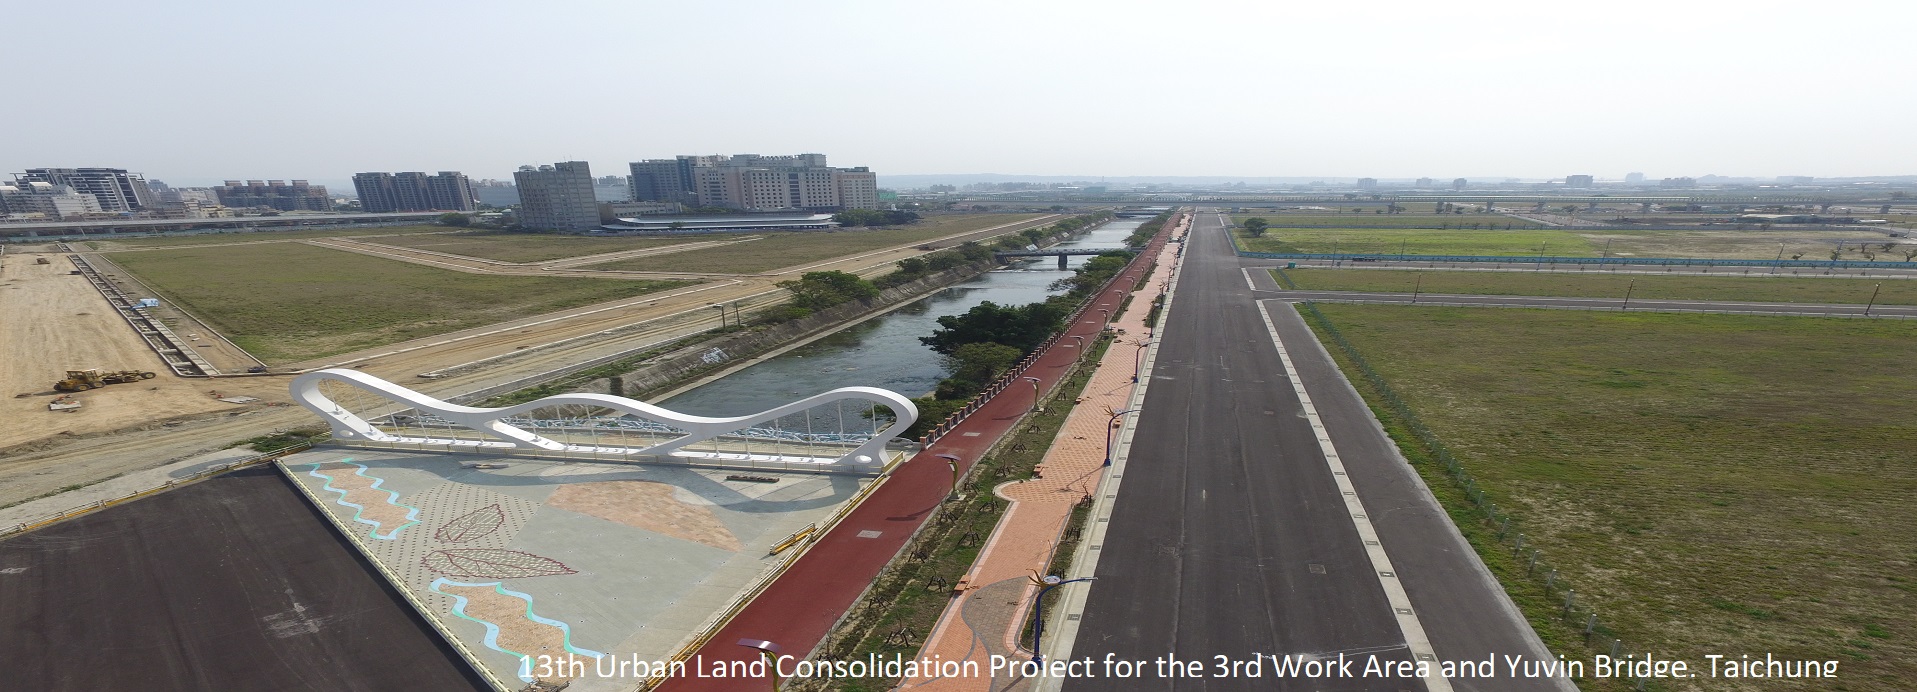 13th Urban Land Consolidation Project for the 3rd Work Area and Yuyin Bridge, Taichung City